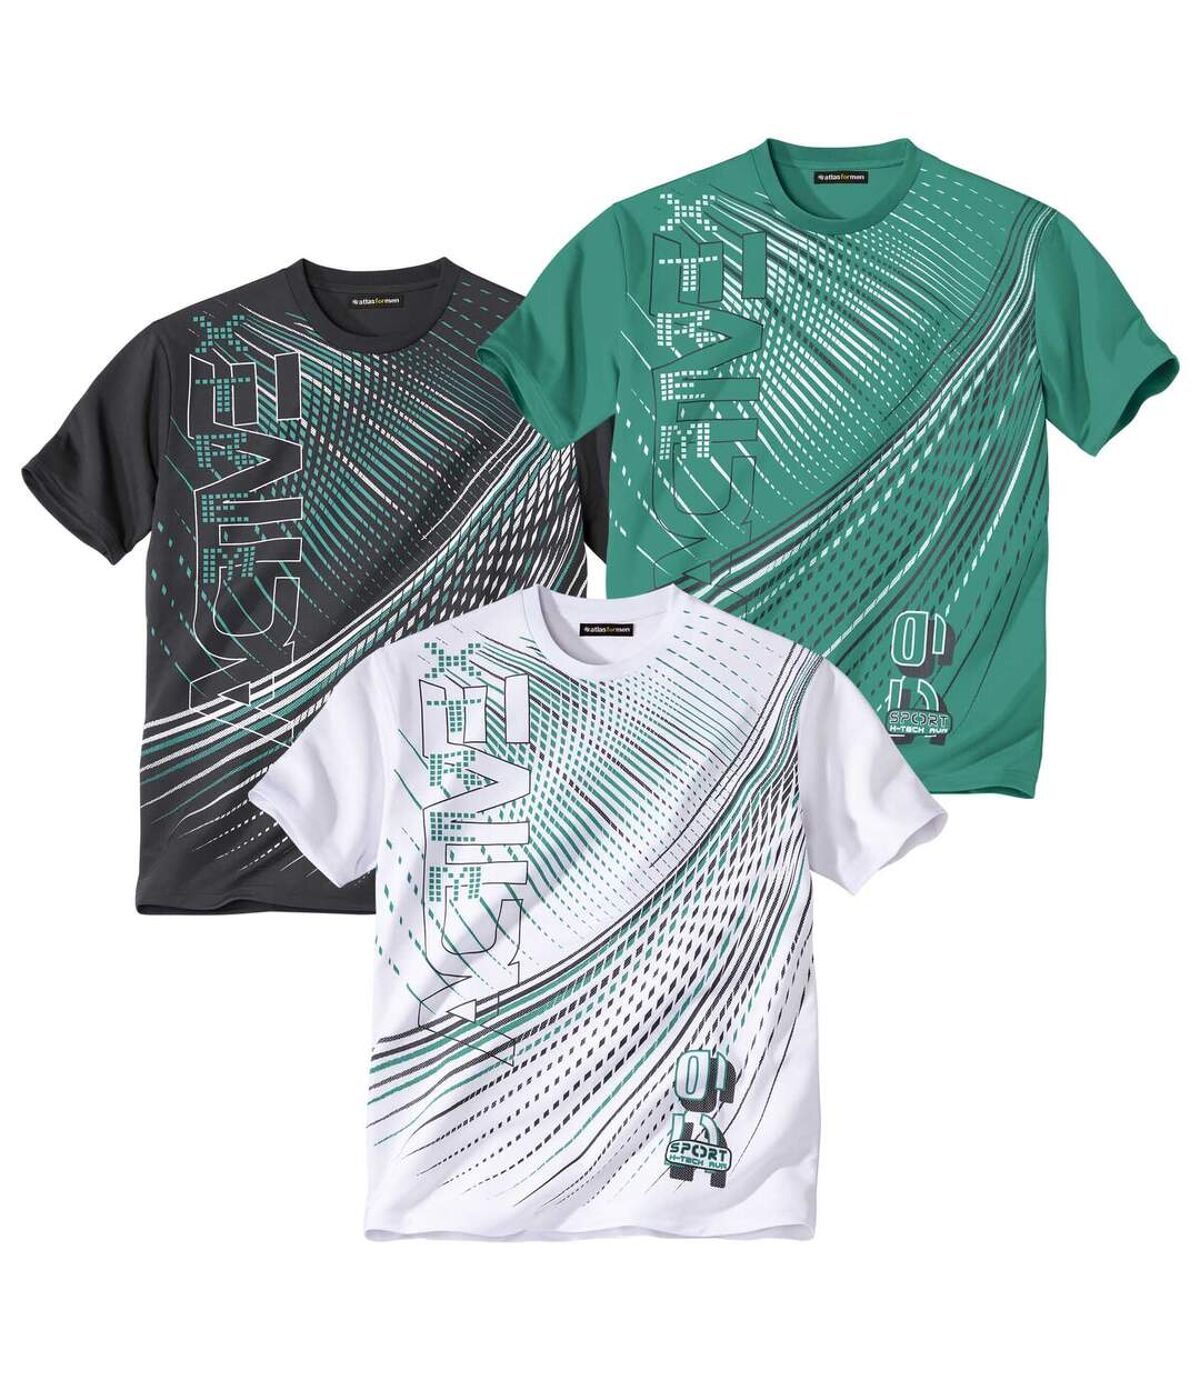 Pack of 3 Men's Active T-Shirts - Anthracite Green White Atlas For Men